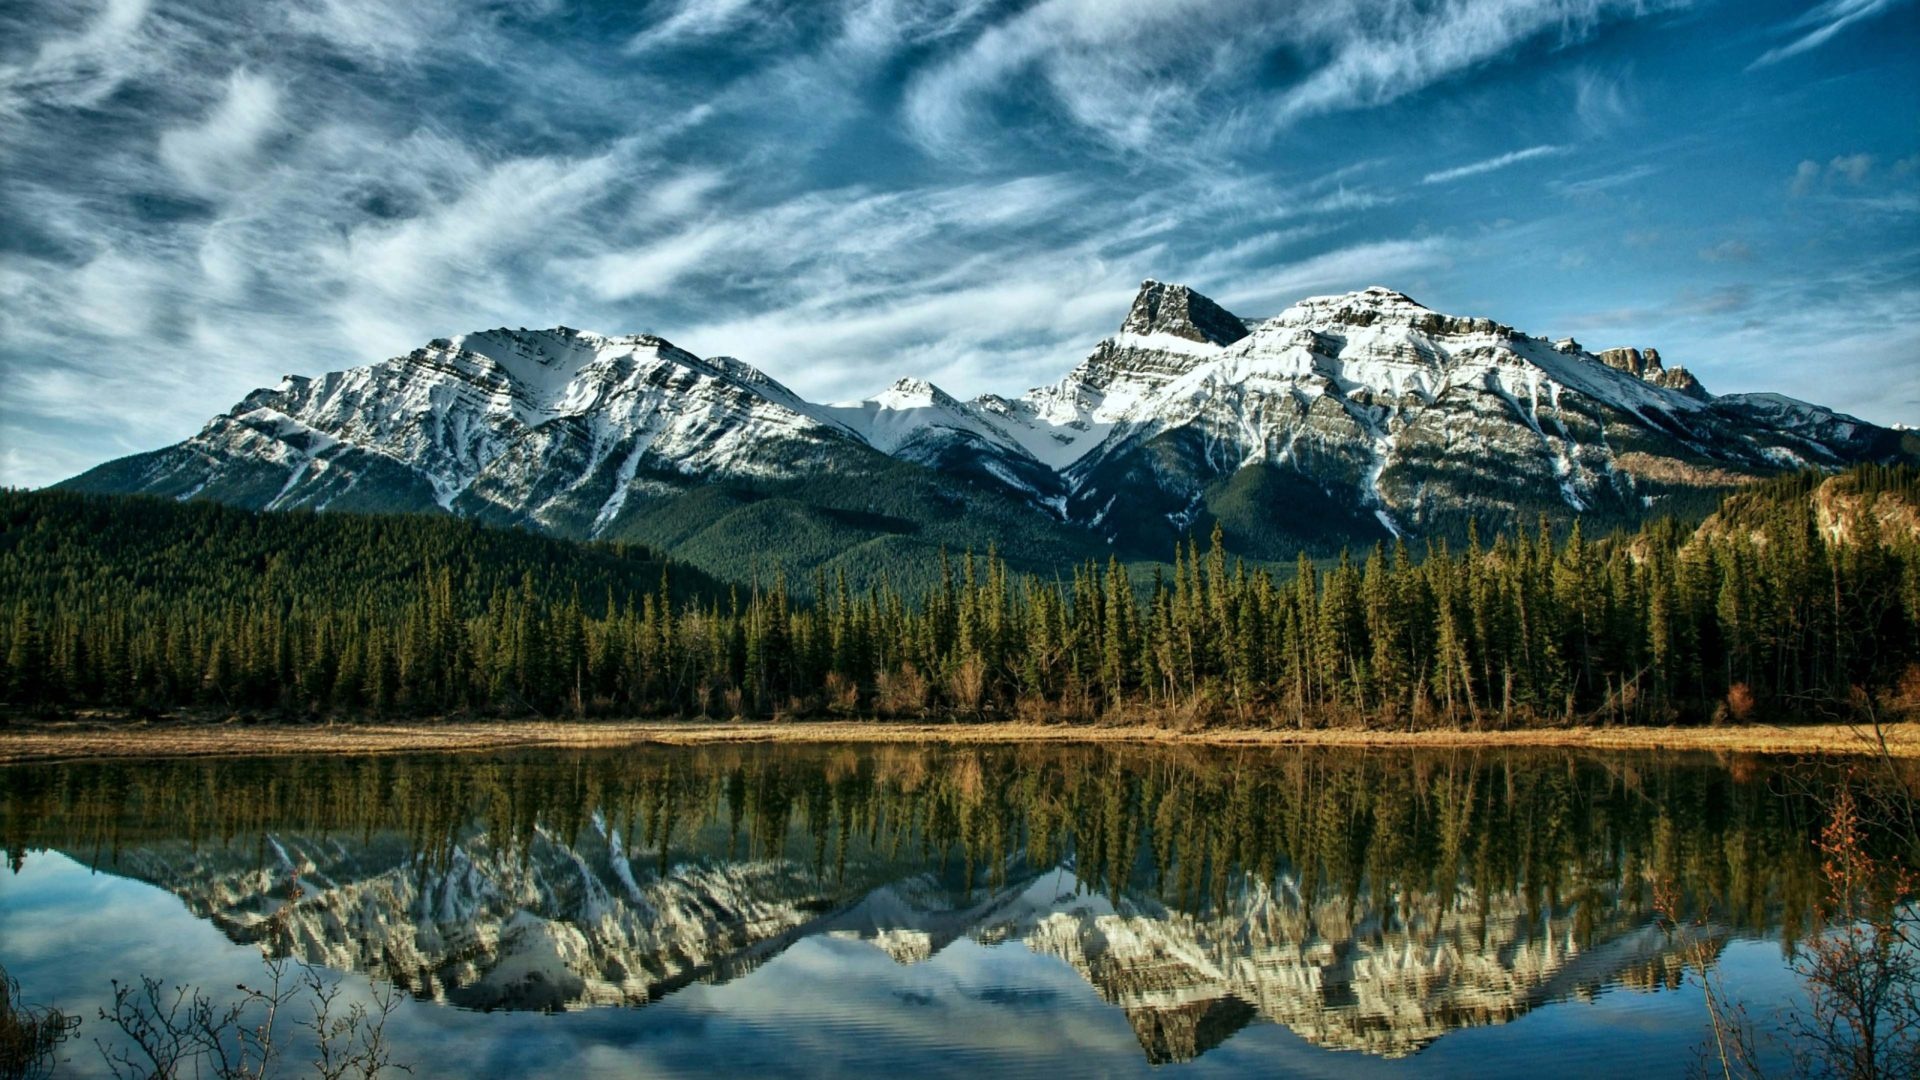 Banff National Park, Serene lakes, Snowy mountains, Peaceful forests, 1920x1080 Full HD Desktop